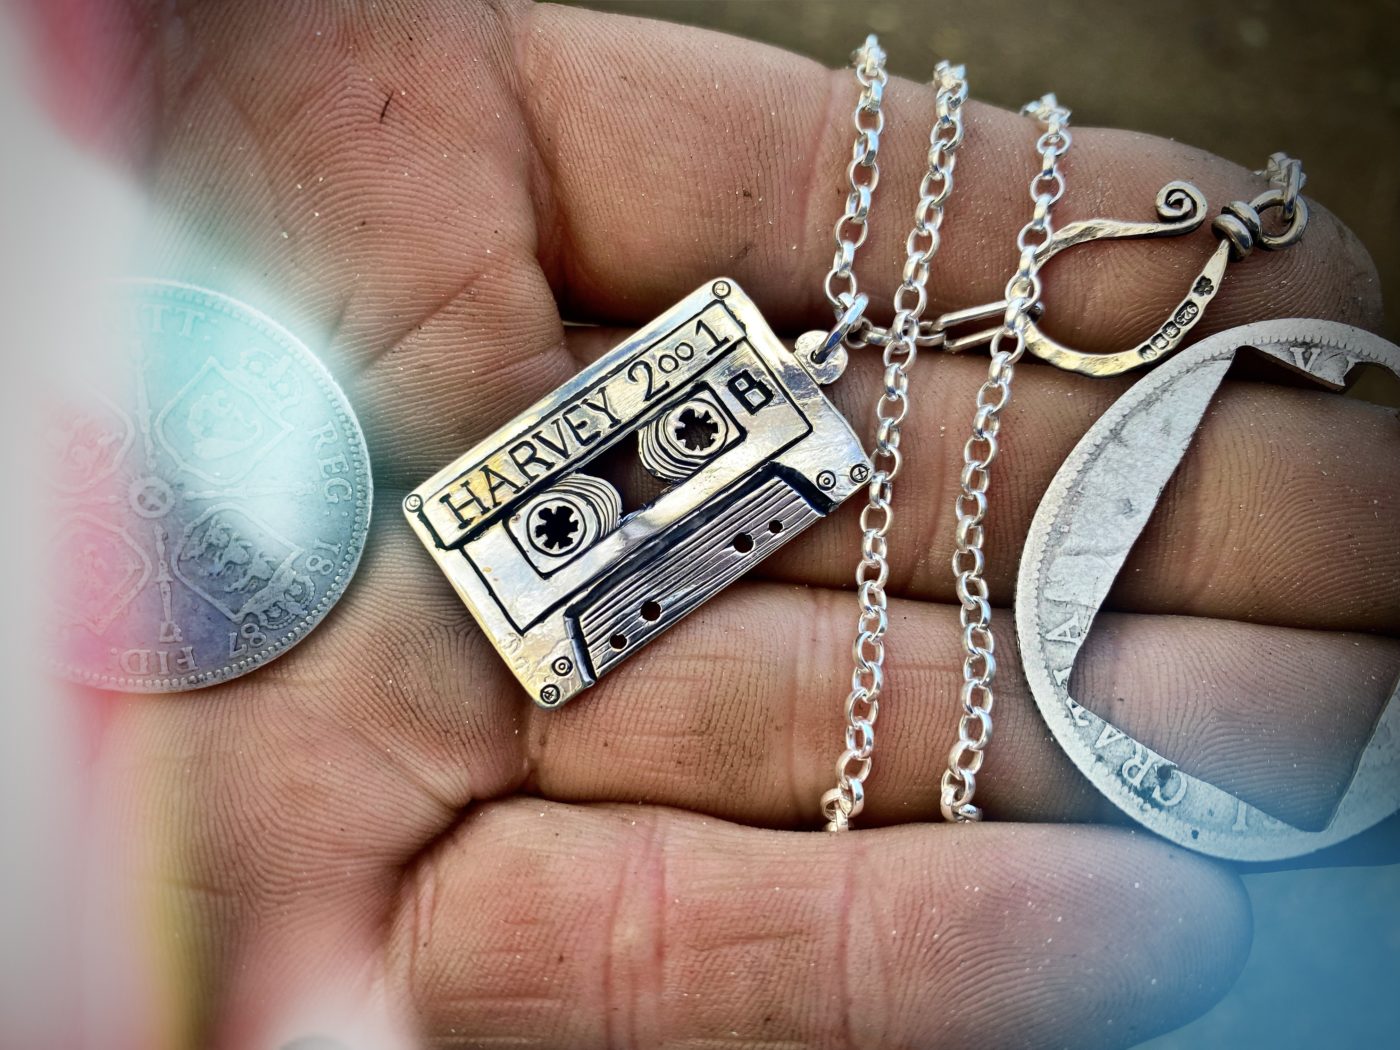 mix-tape necklace - handmade and recycled using silver florins mixtape jewellery